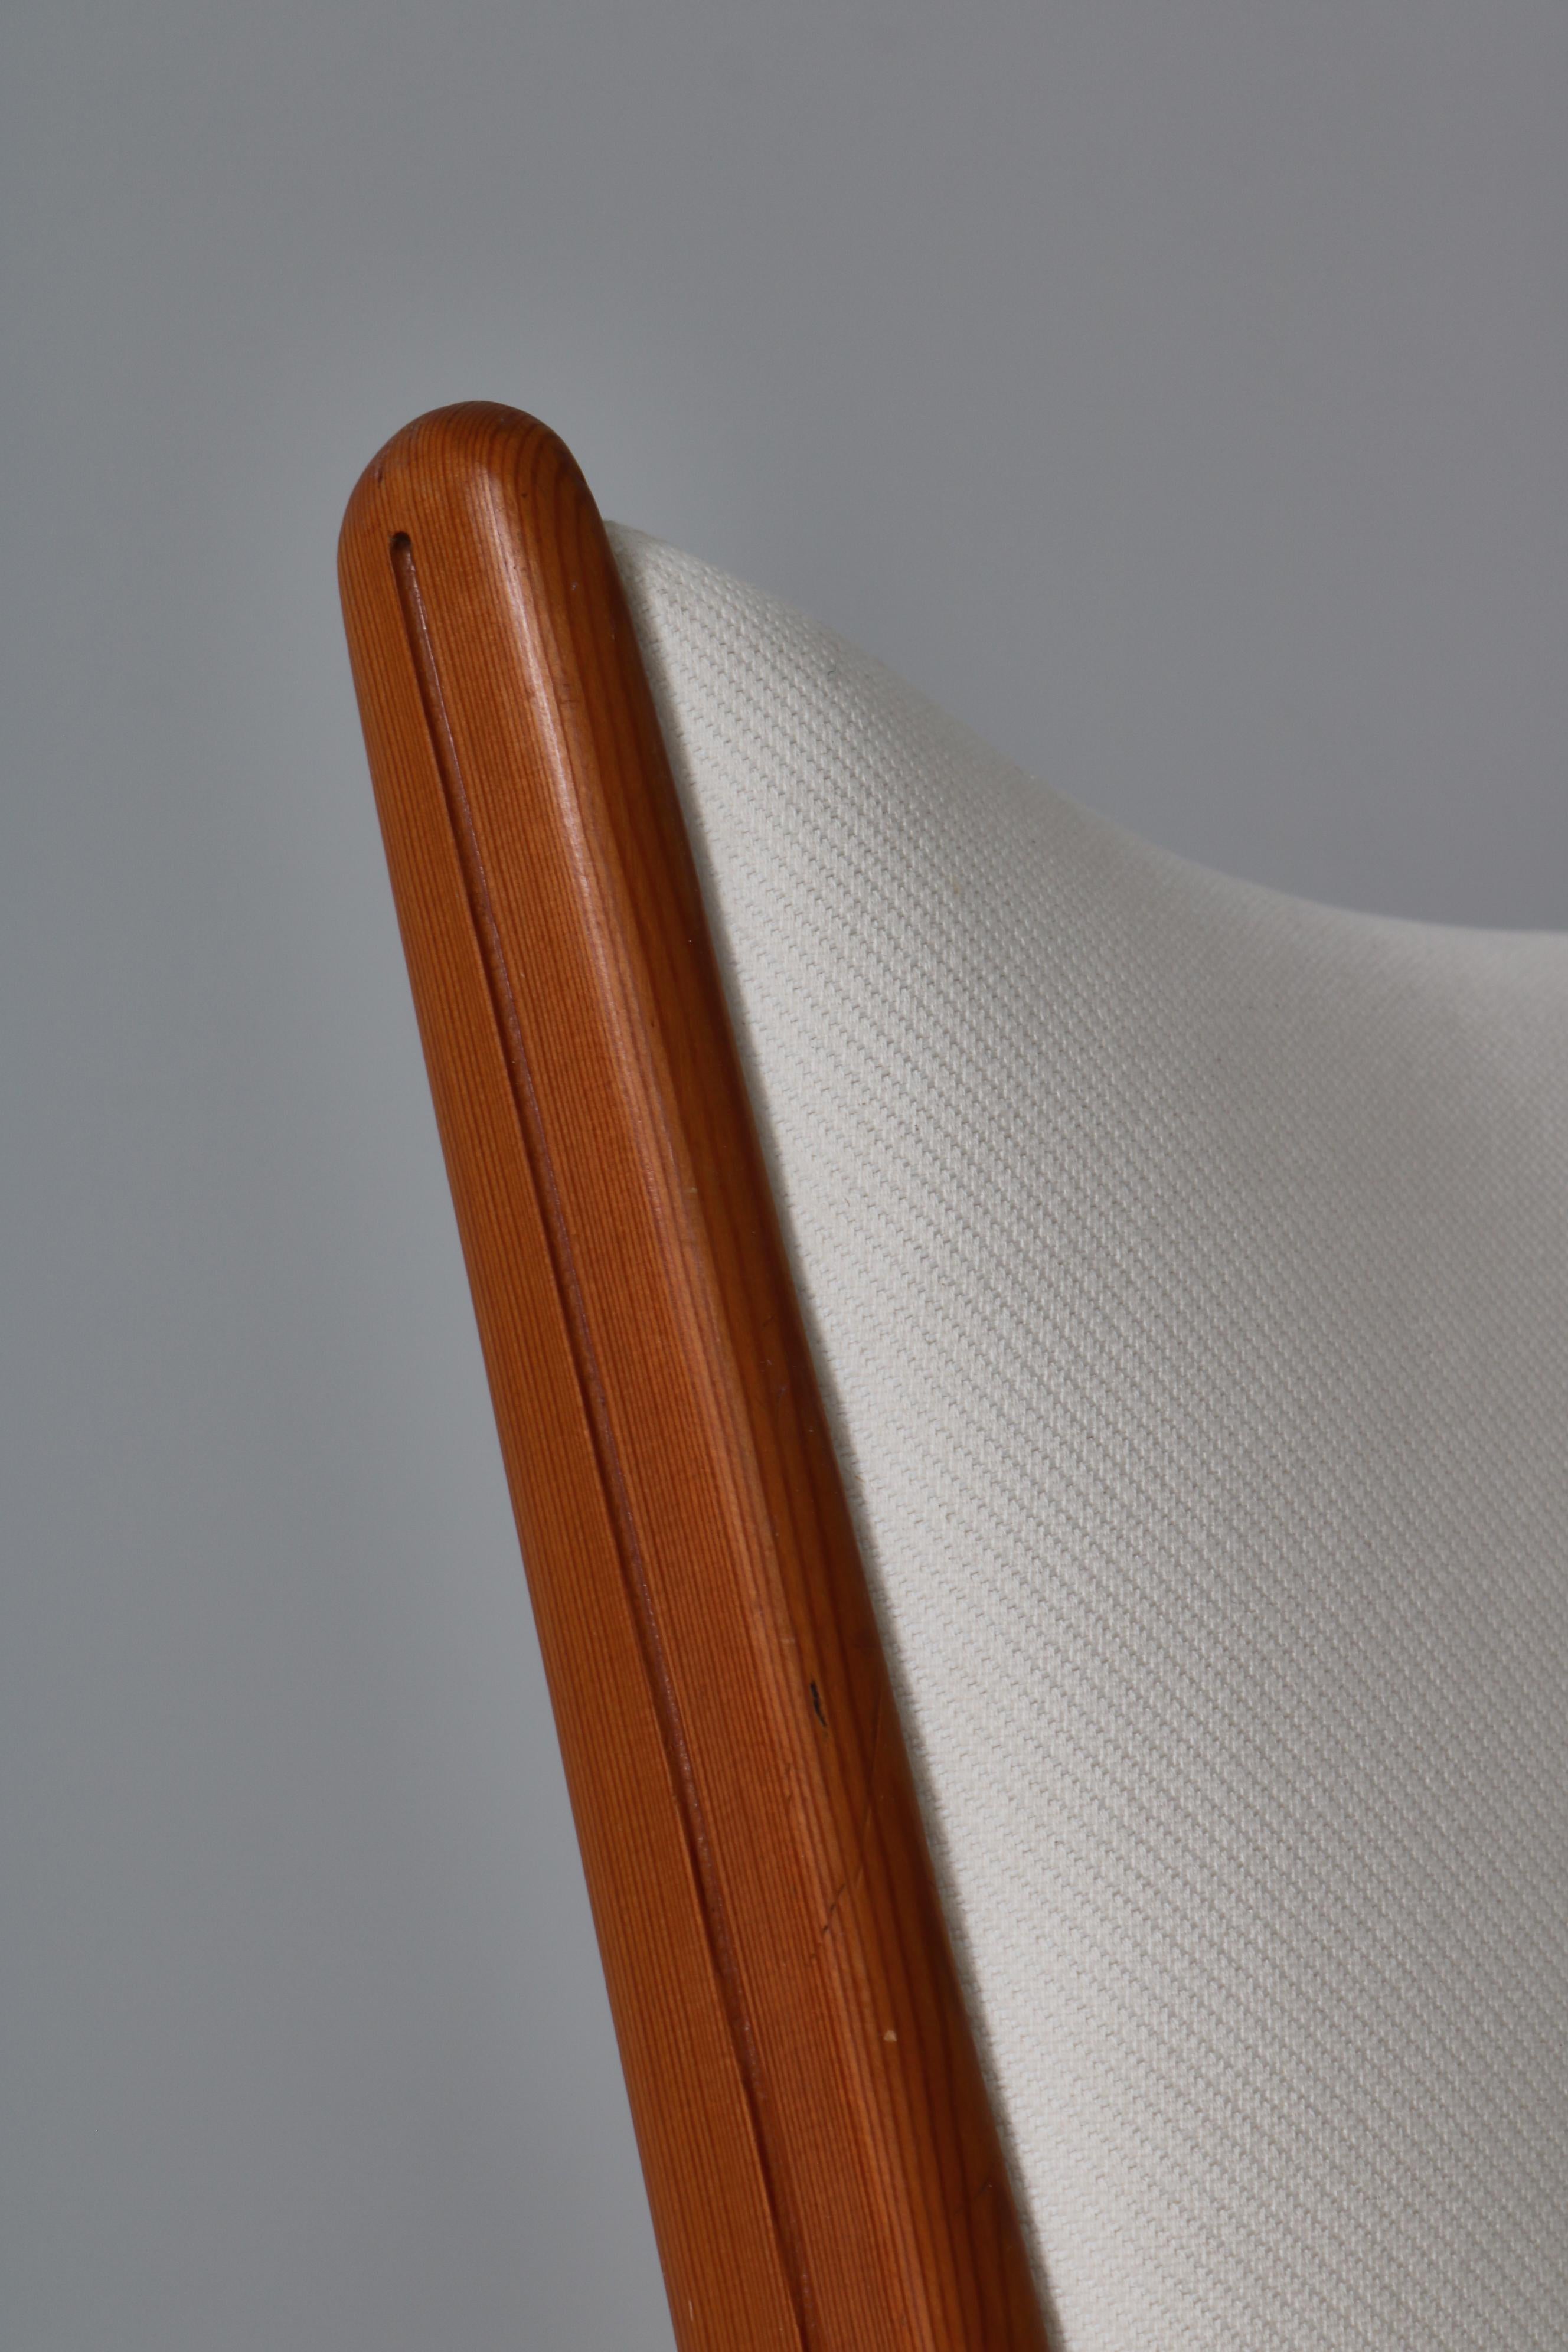 Swedish Cabinetmaker Settee / Sofa in Pinewood and White Vägen Linen, 1940s For Sale 2